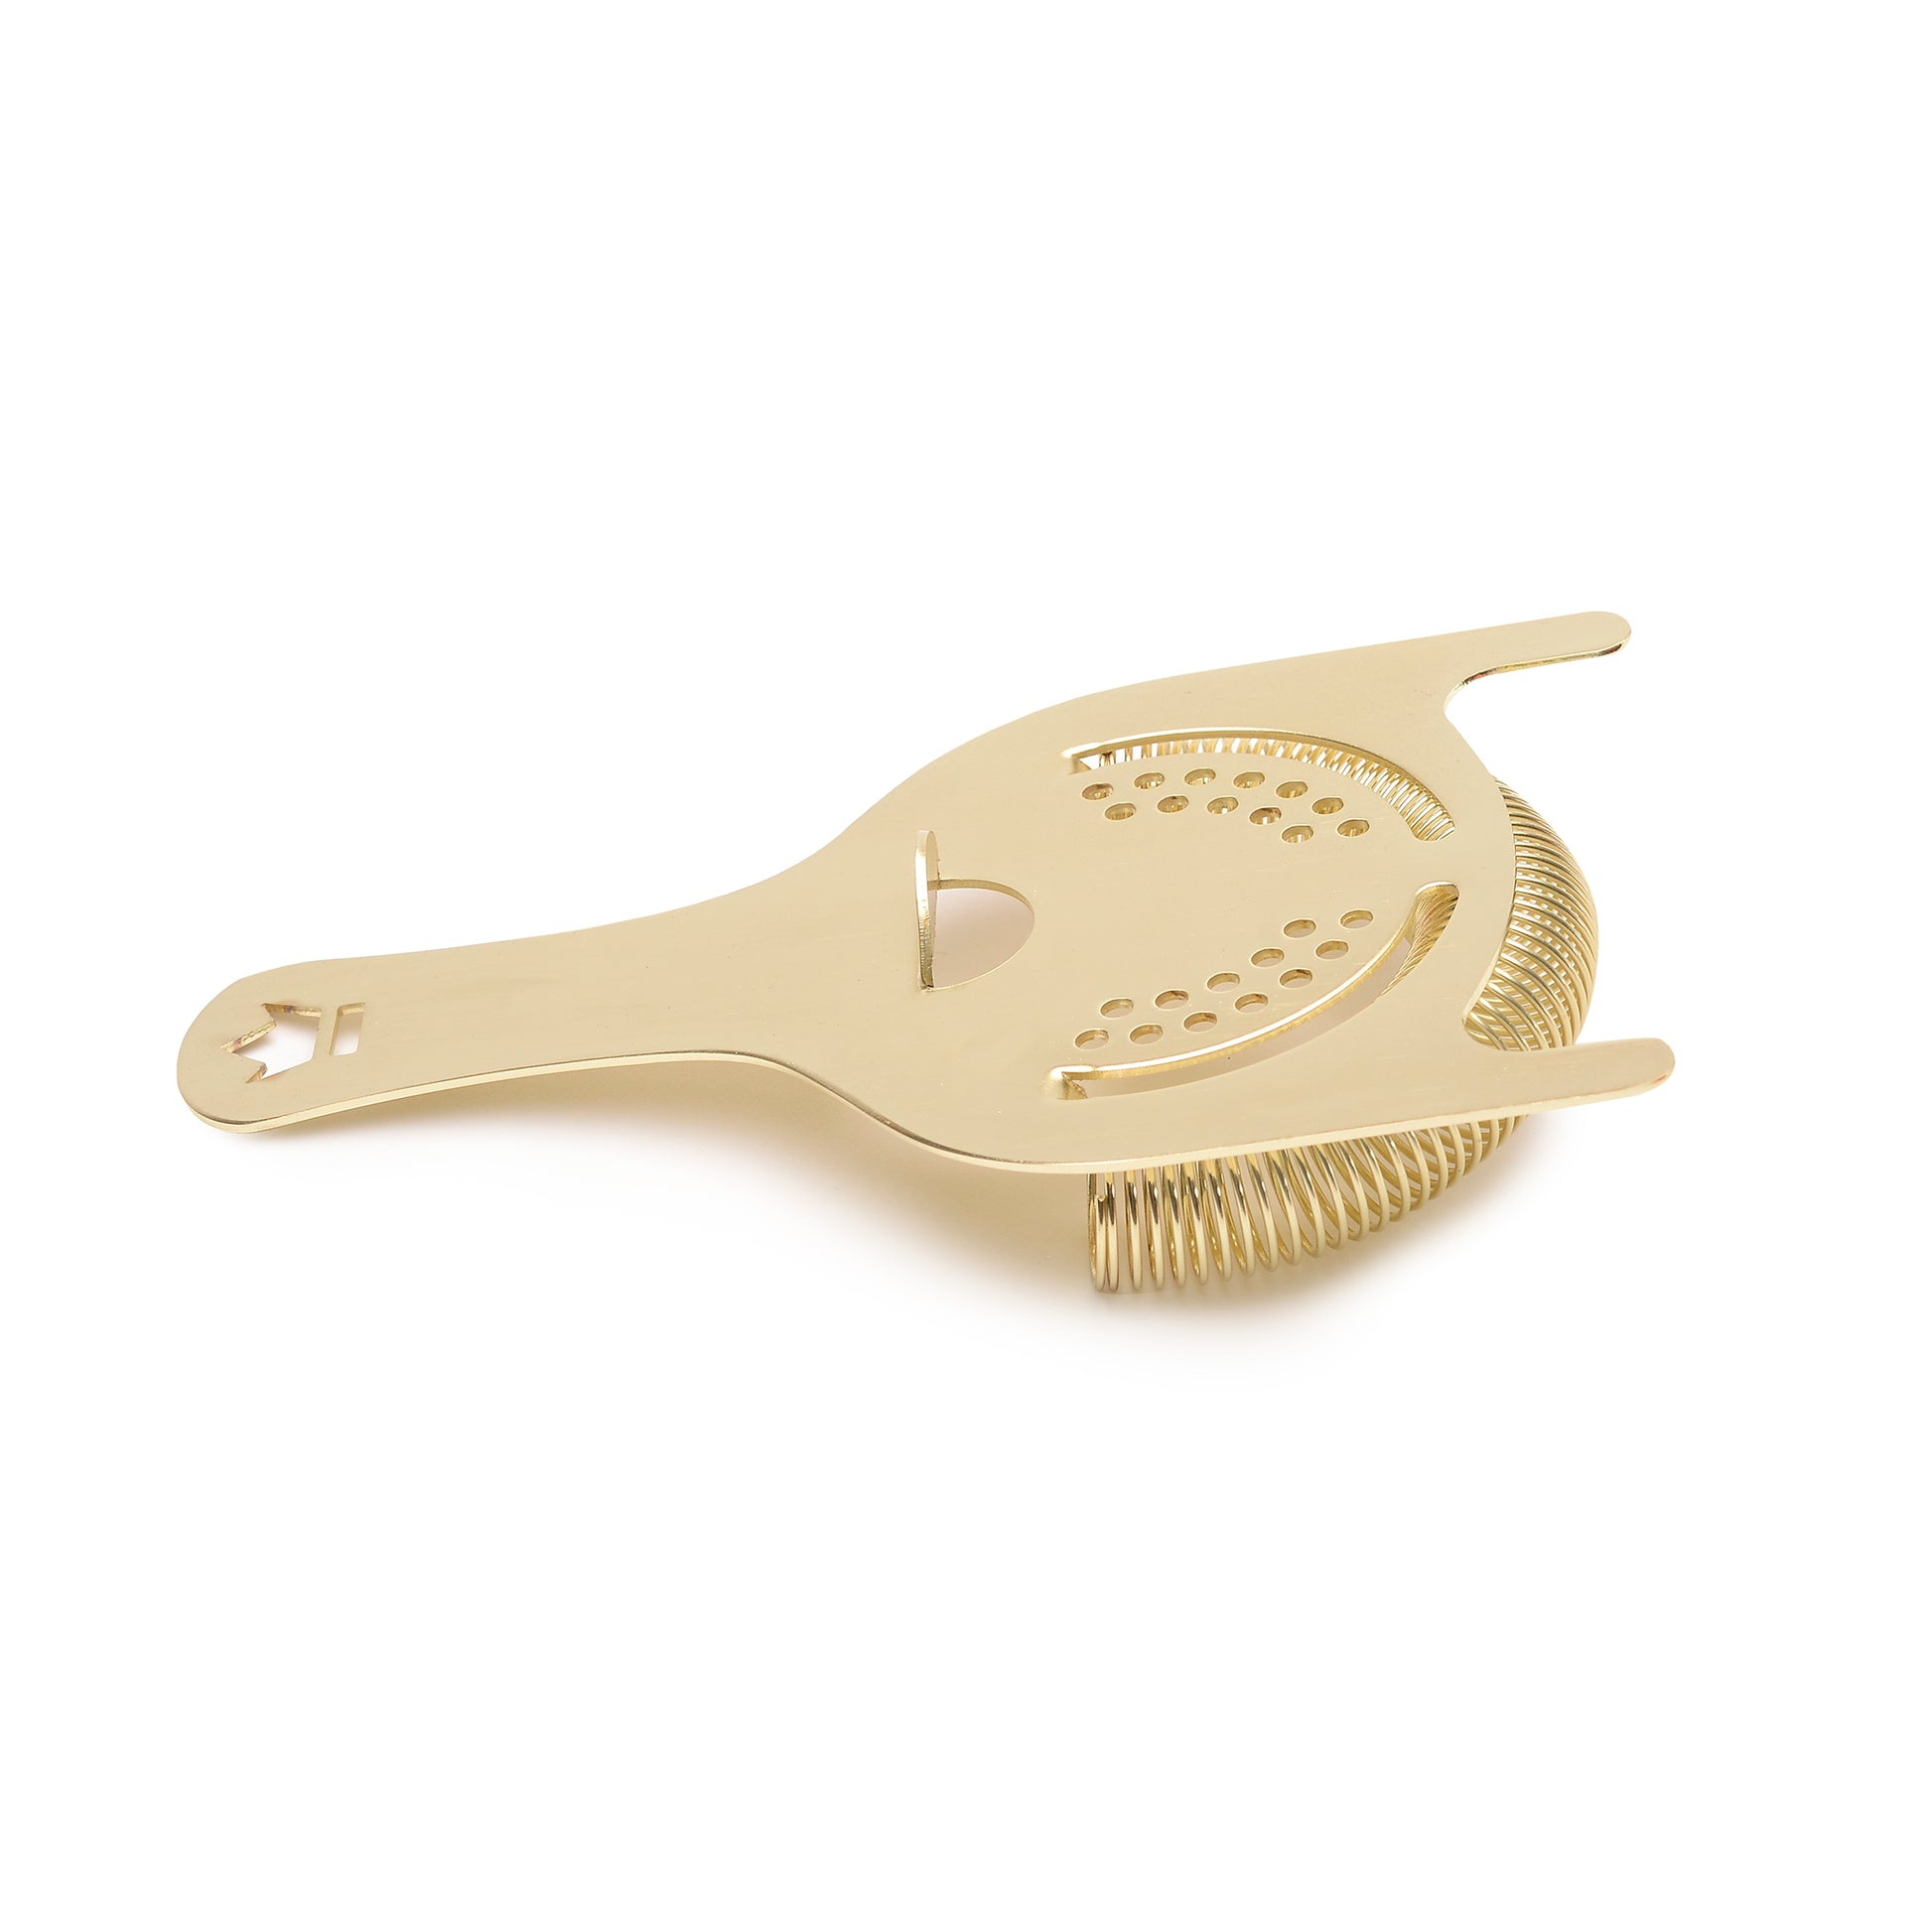 KORIKO 2-PRONG COCKTAIL STRAINER / GOLD-PLATED